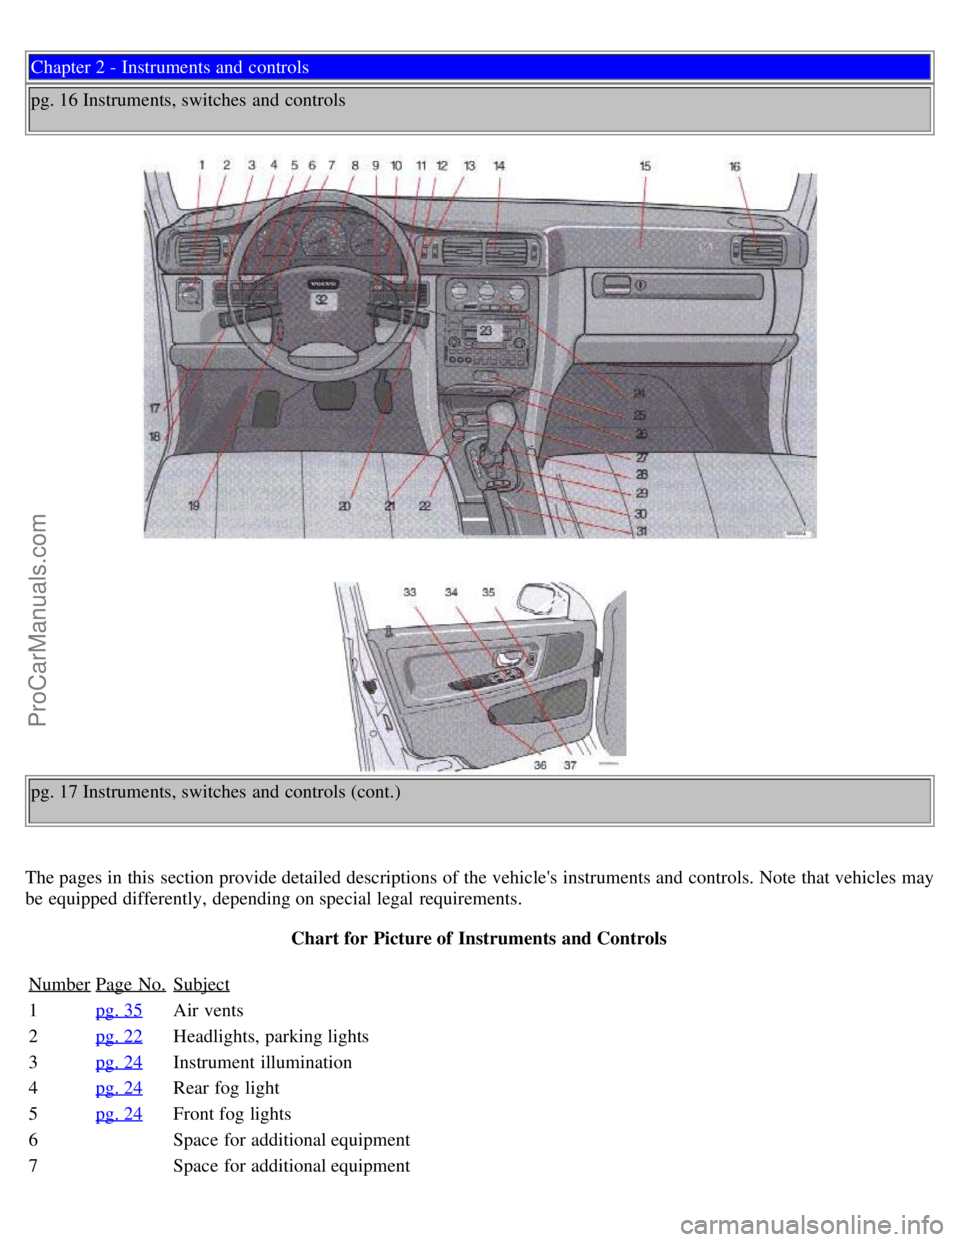 VOLVO V70 1999  Owners Manual Chapter 2 - Instruments and  controls
pg. 16 Instruments, switches  and  controls
pg. 17 Instruments, switches  and  controls (cont.)
The pages in this  section provide detailed descriptions of the ve